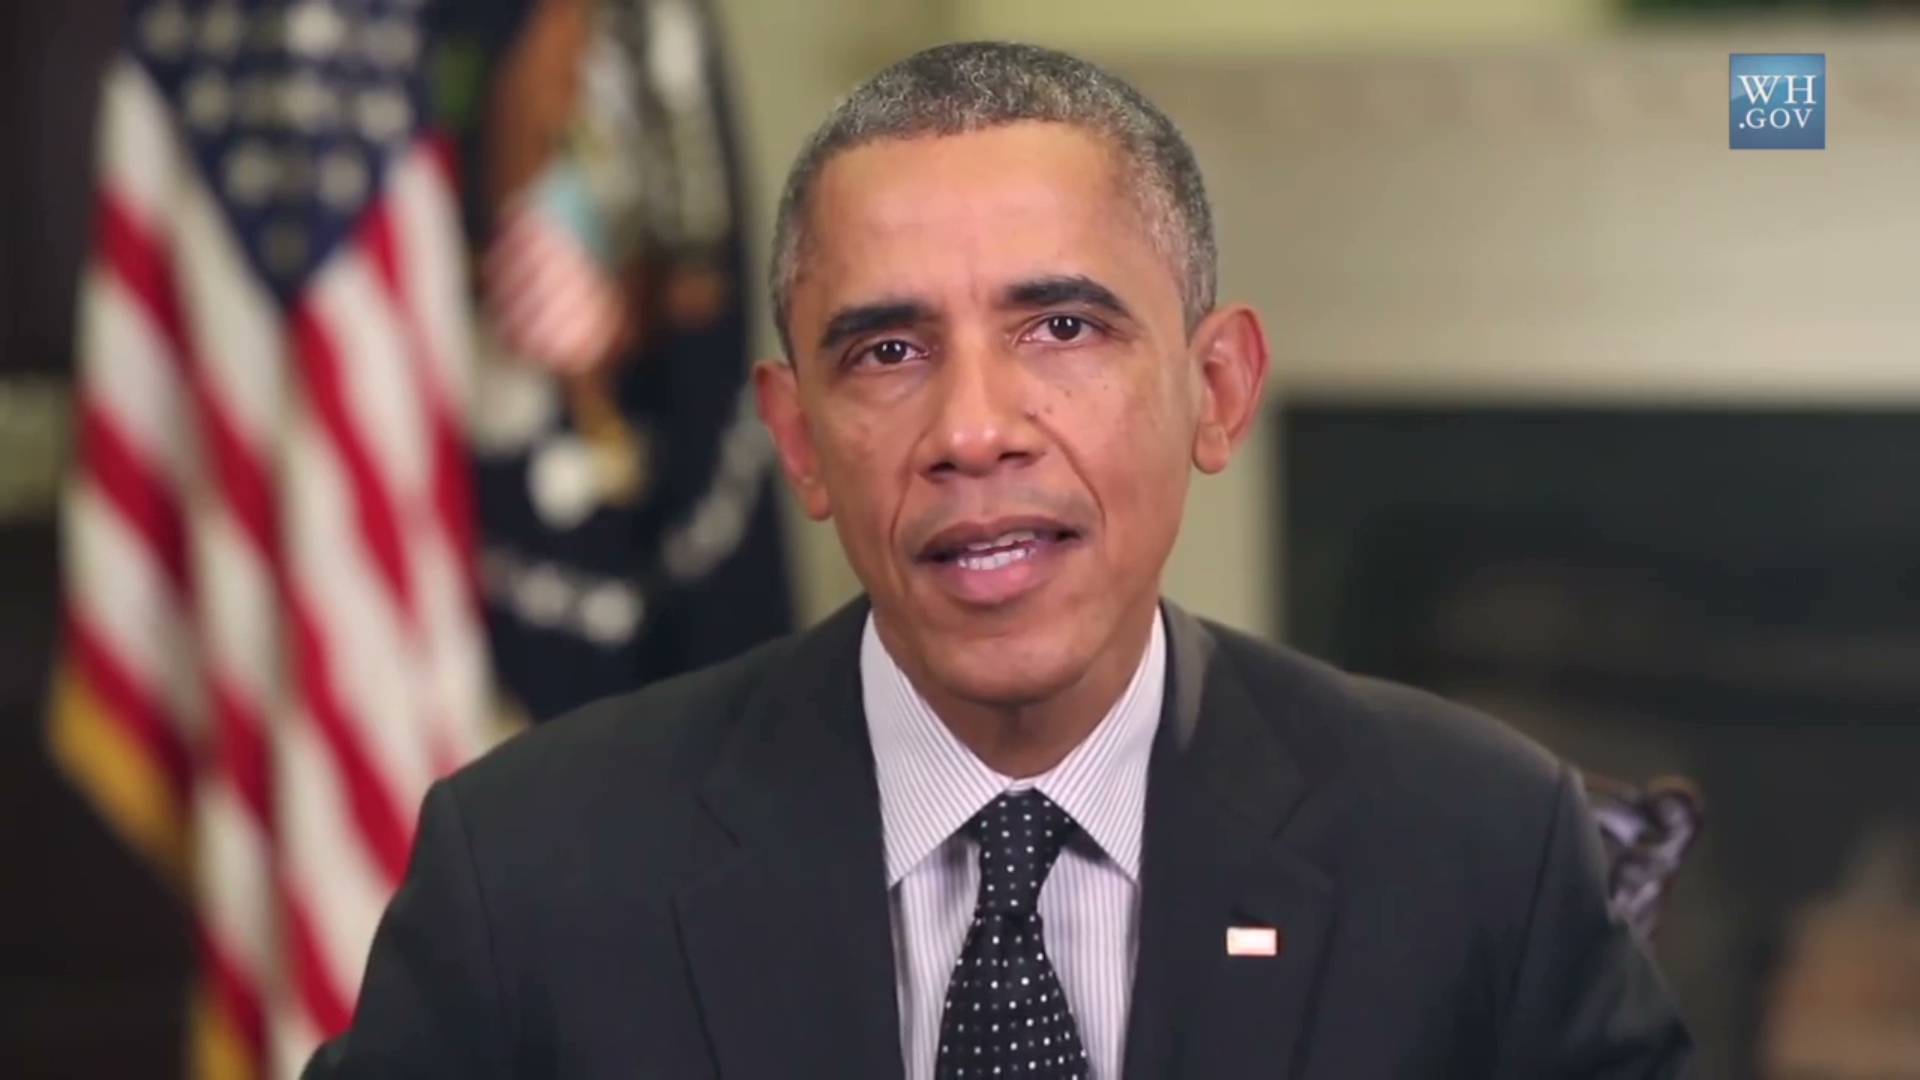 President's Weekly Address, 2014, Politics News, National News, President Obama, Health News, Affordable Care Act